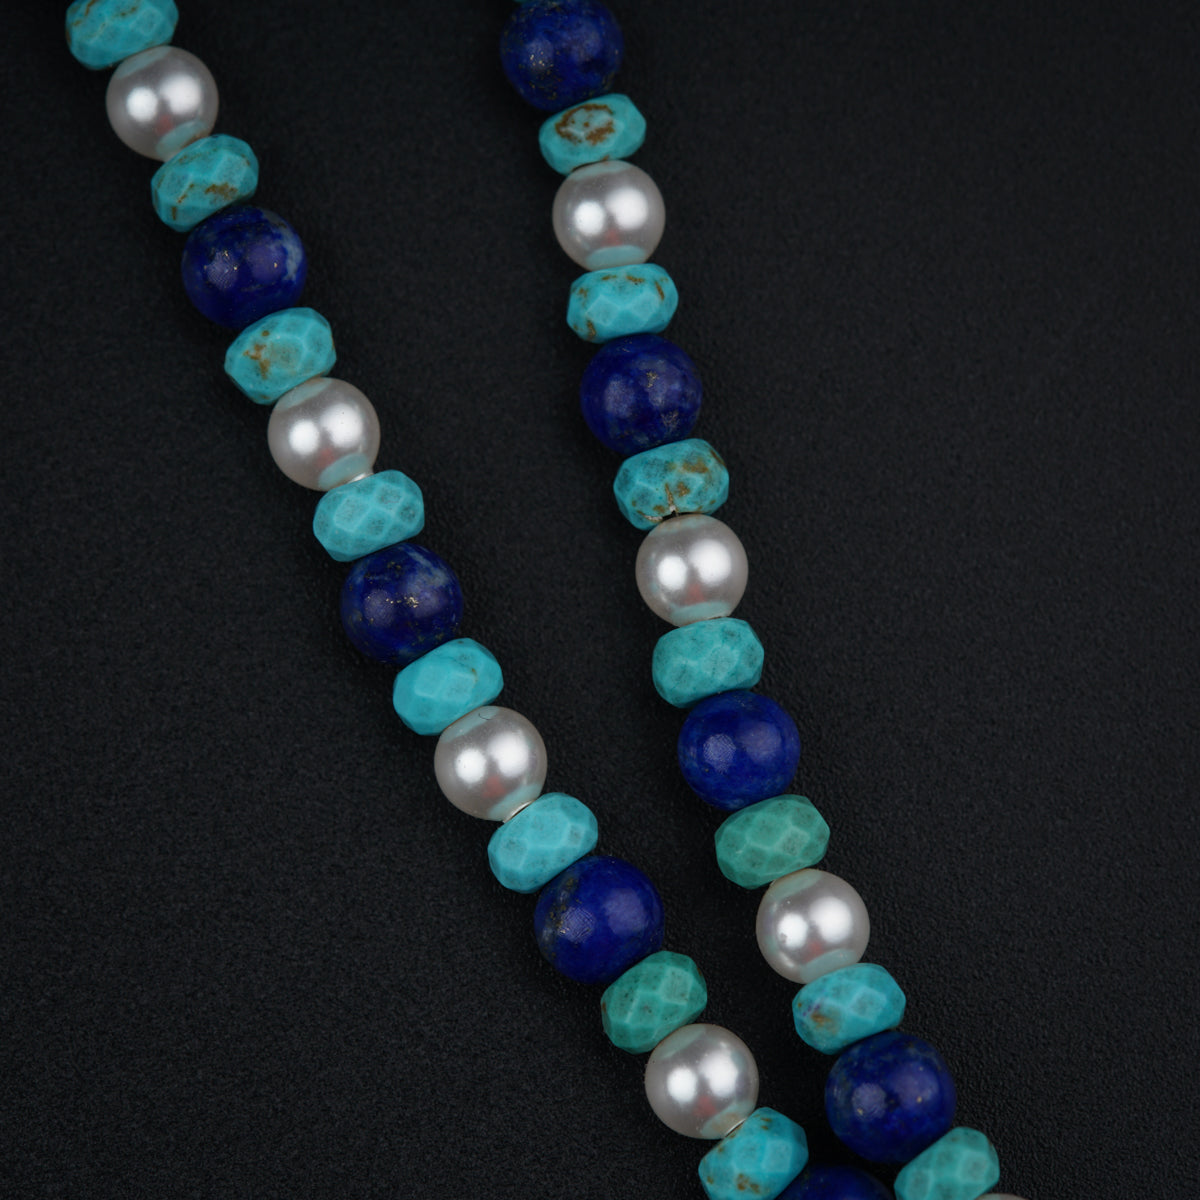 Antique Silver Choker with Pearls, Lapis Lazuli and turquoise